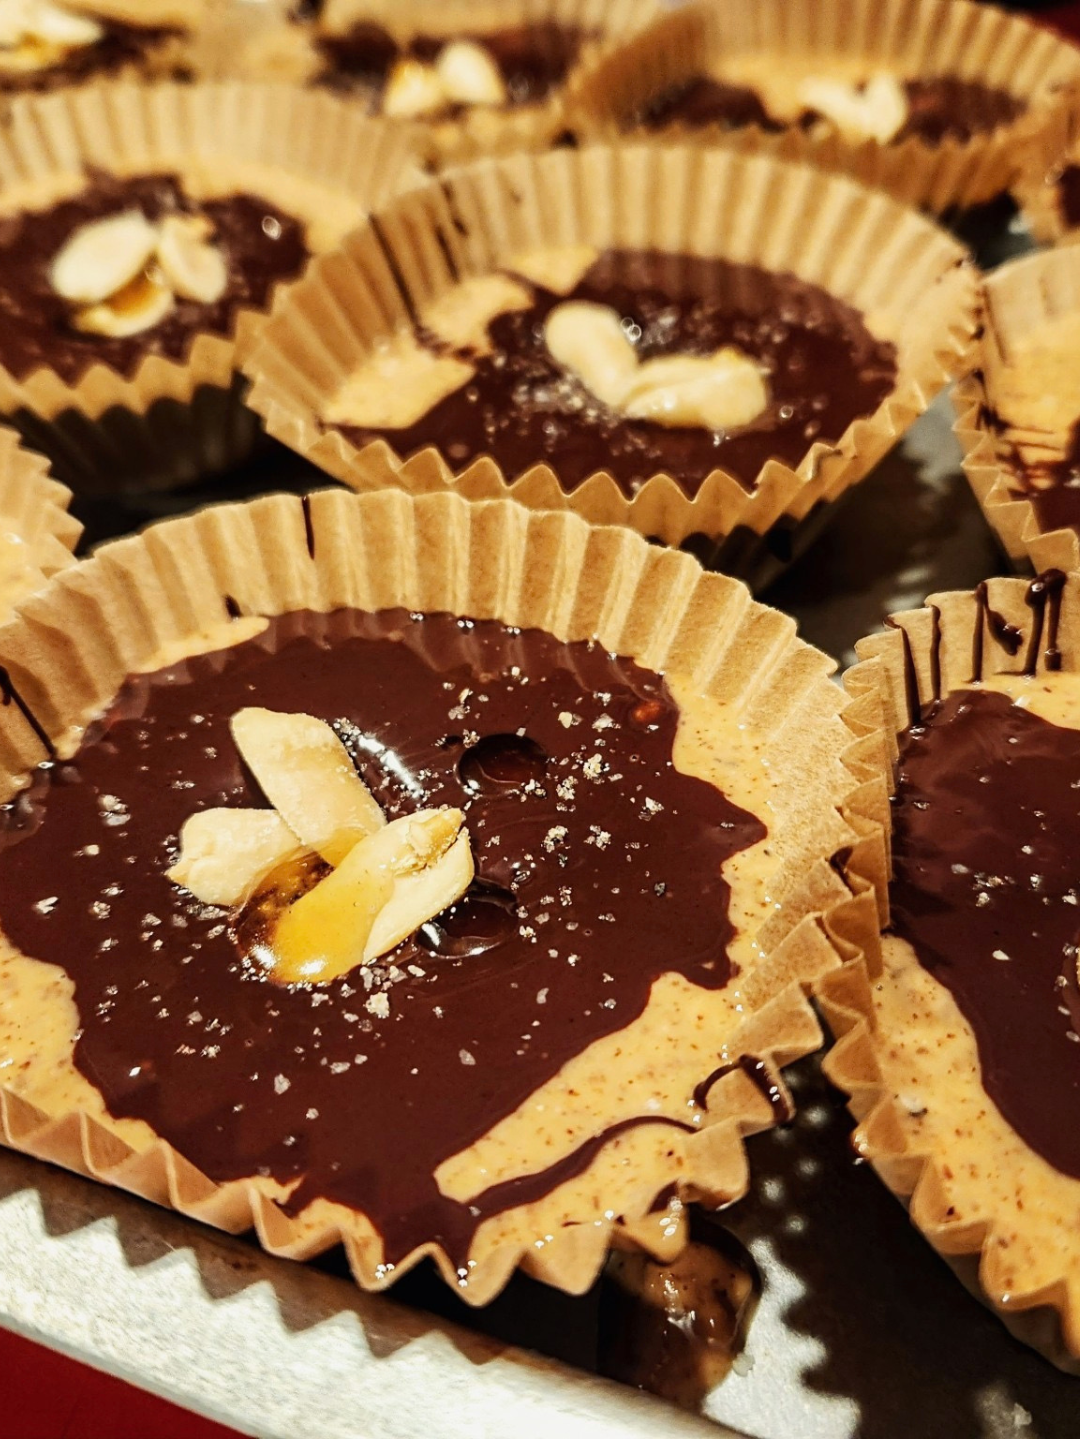 Chocolate Almond Butter Cups dusted with Papa Joe's Salt Original